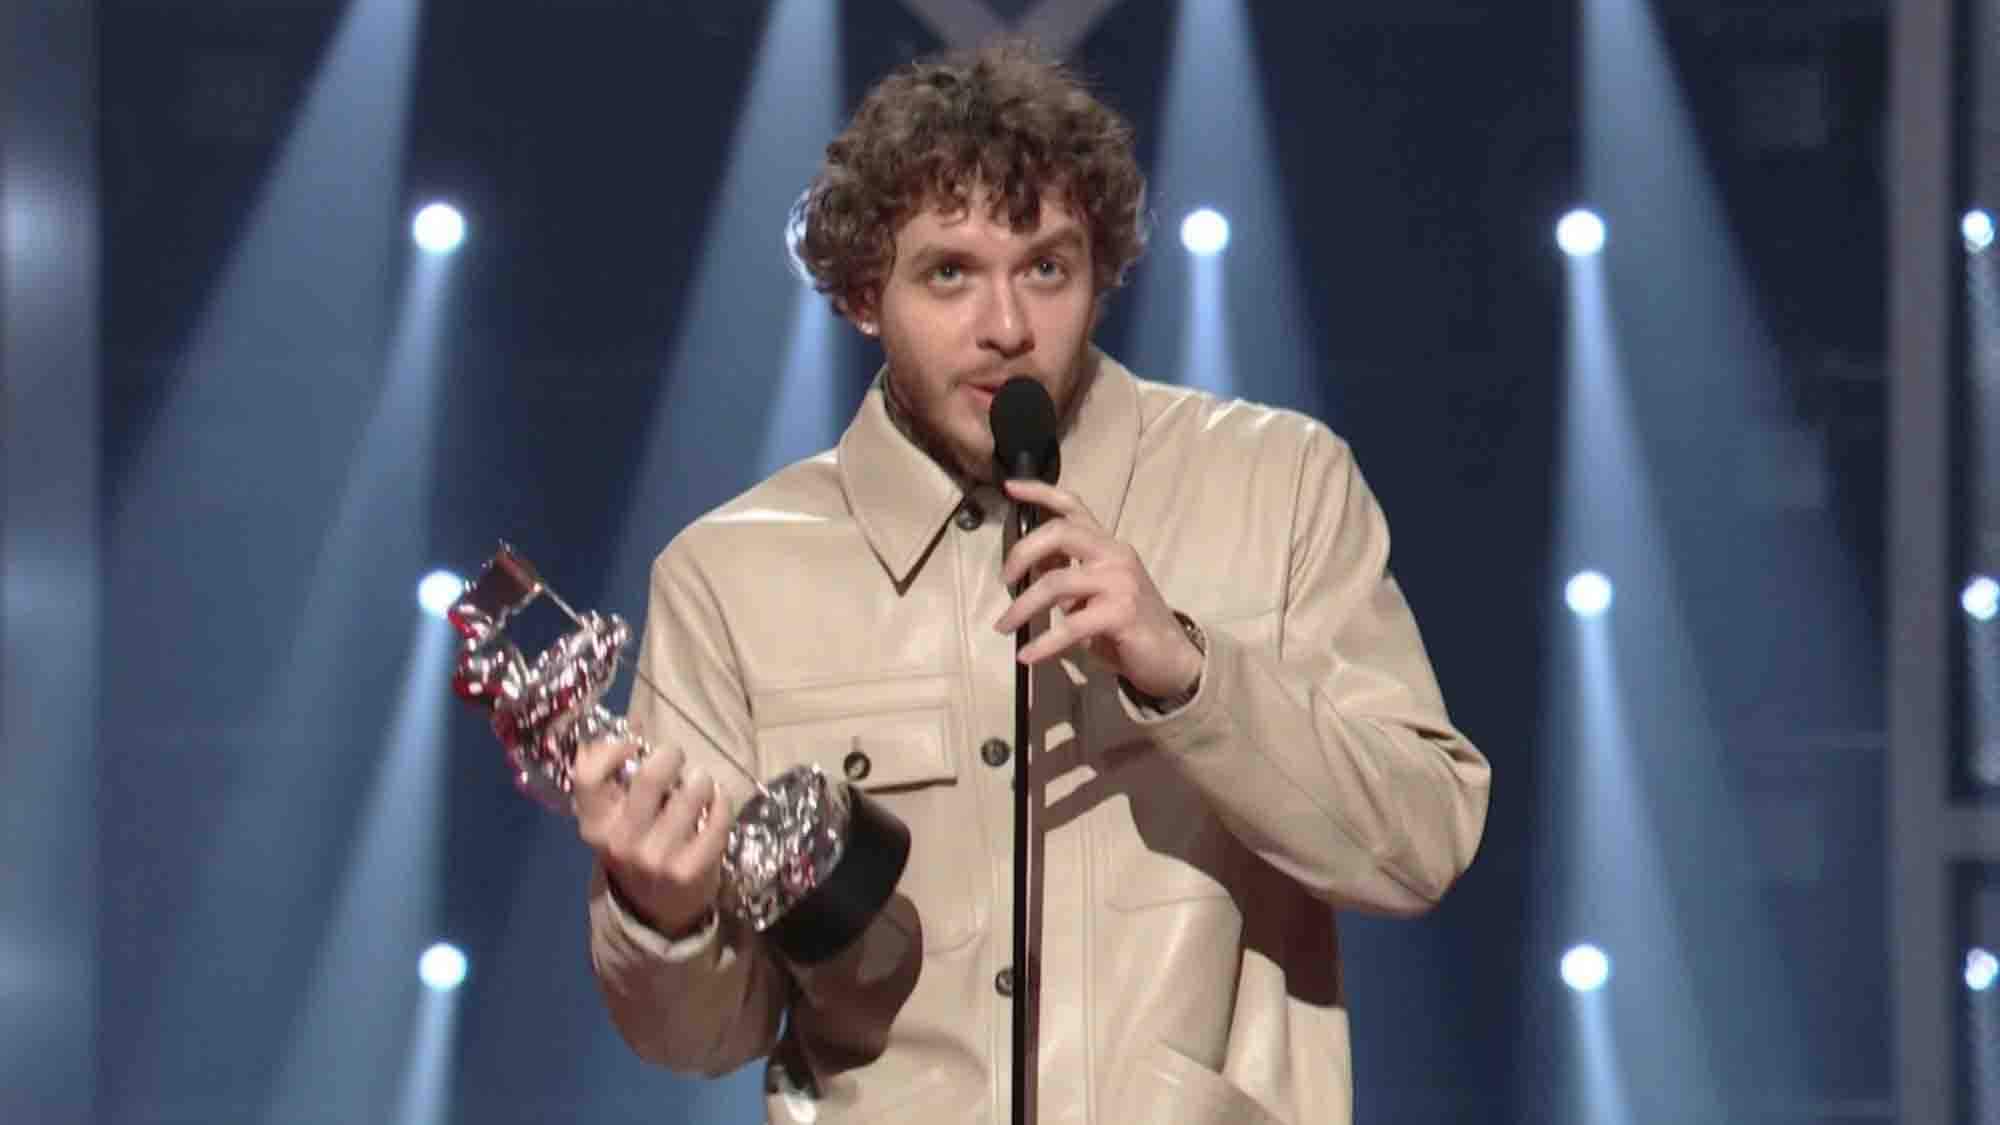 MTV VMA Jack Harlow's 'First Class' Wins The Song Of Summer VMA